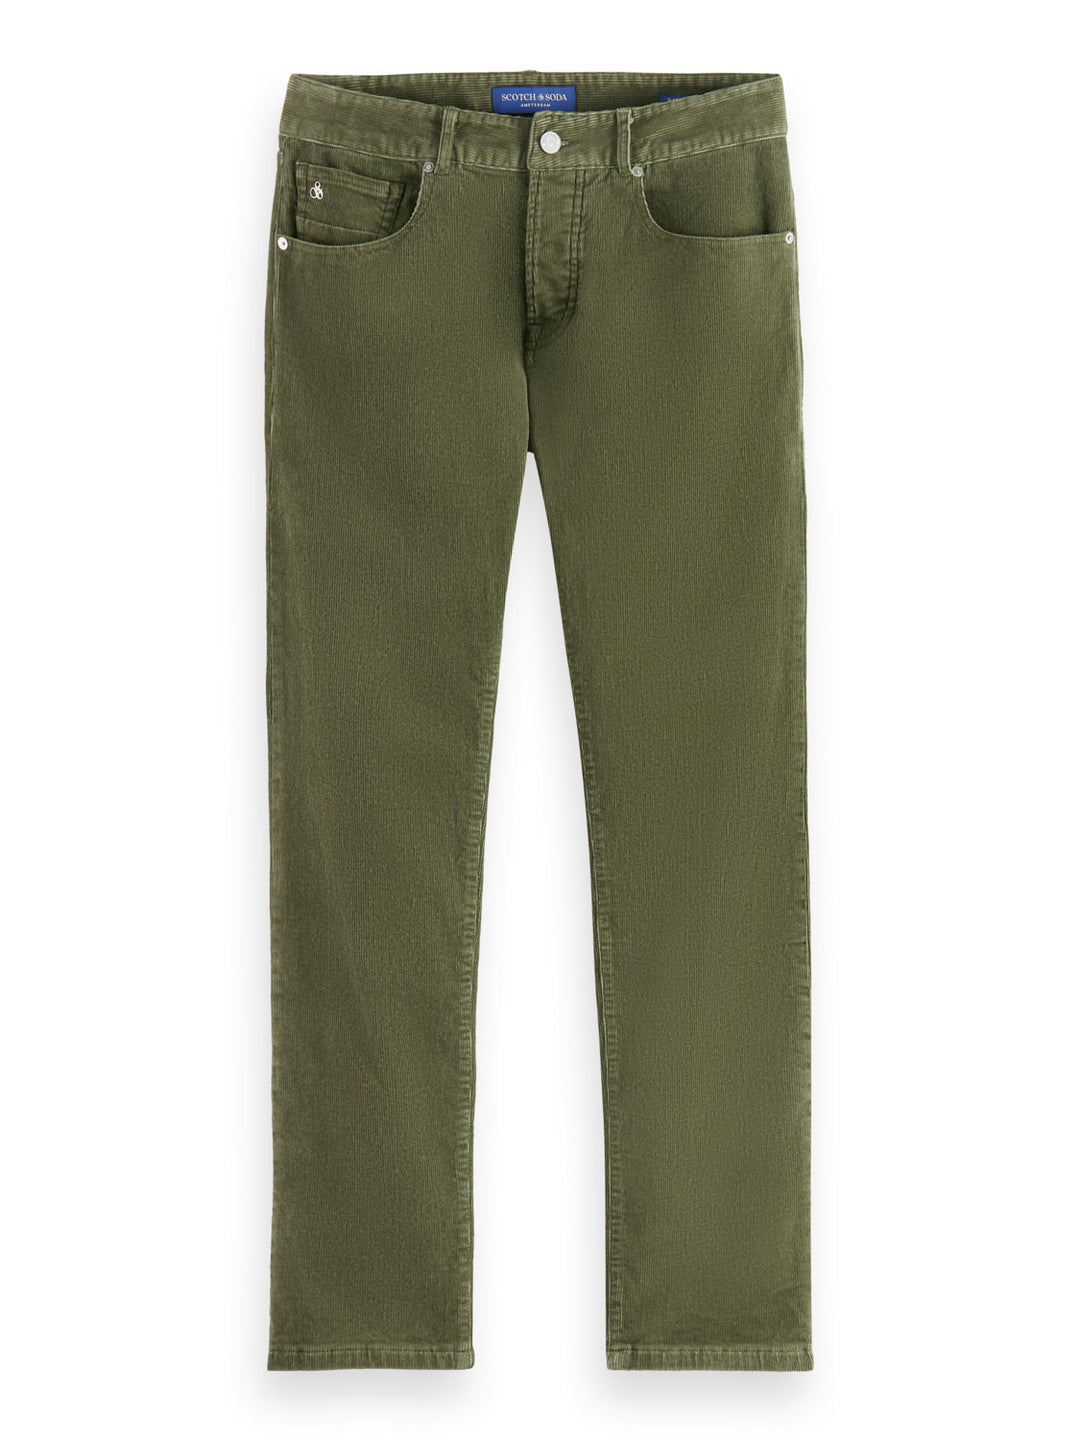 Scotch & Soda - Ralston Slim Fit Corduroy Pants in Army | Buster McGee